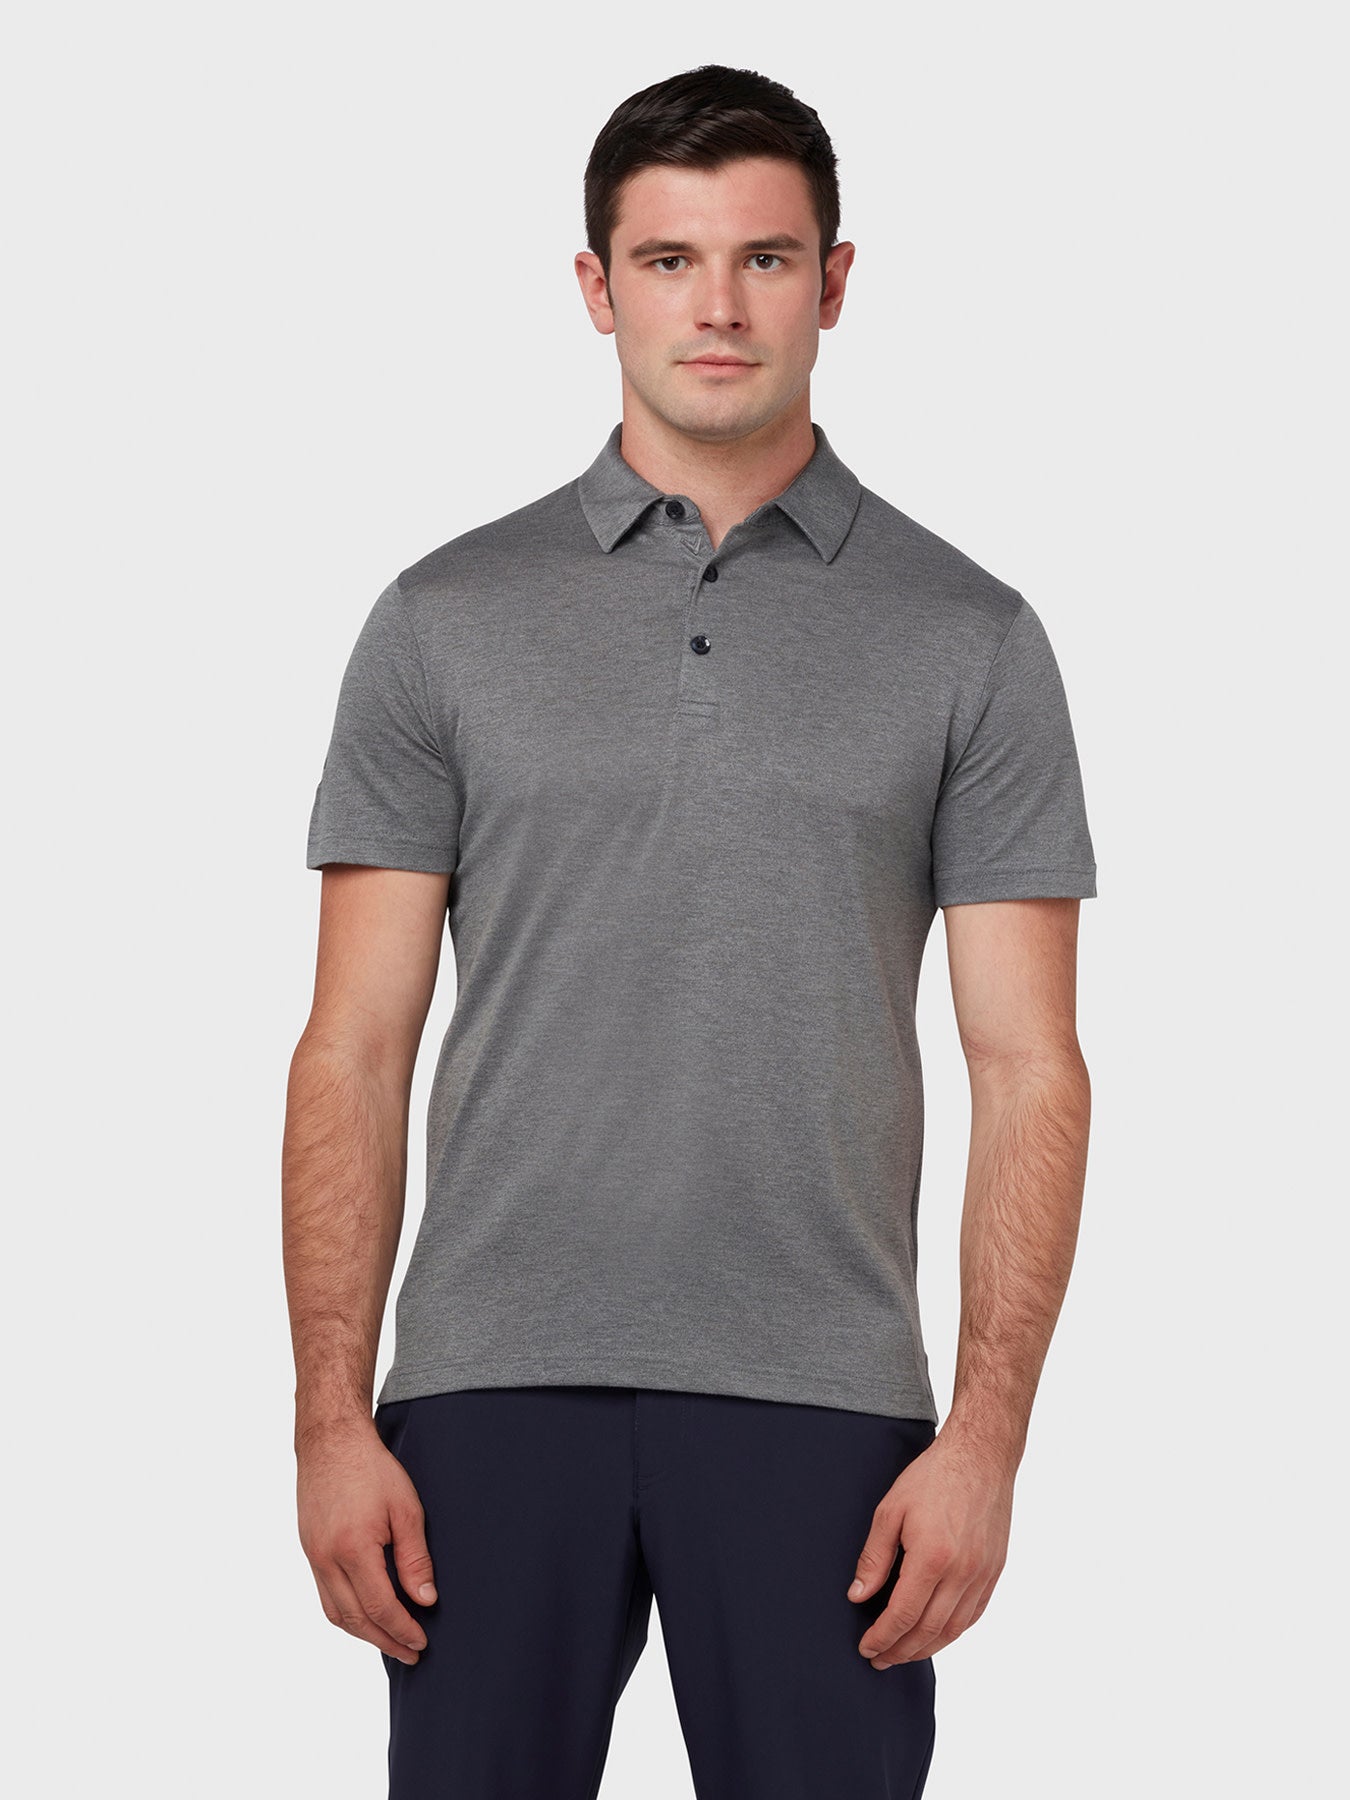 View Soft Touch Solid Polo In Black Heather Black Heather L information